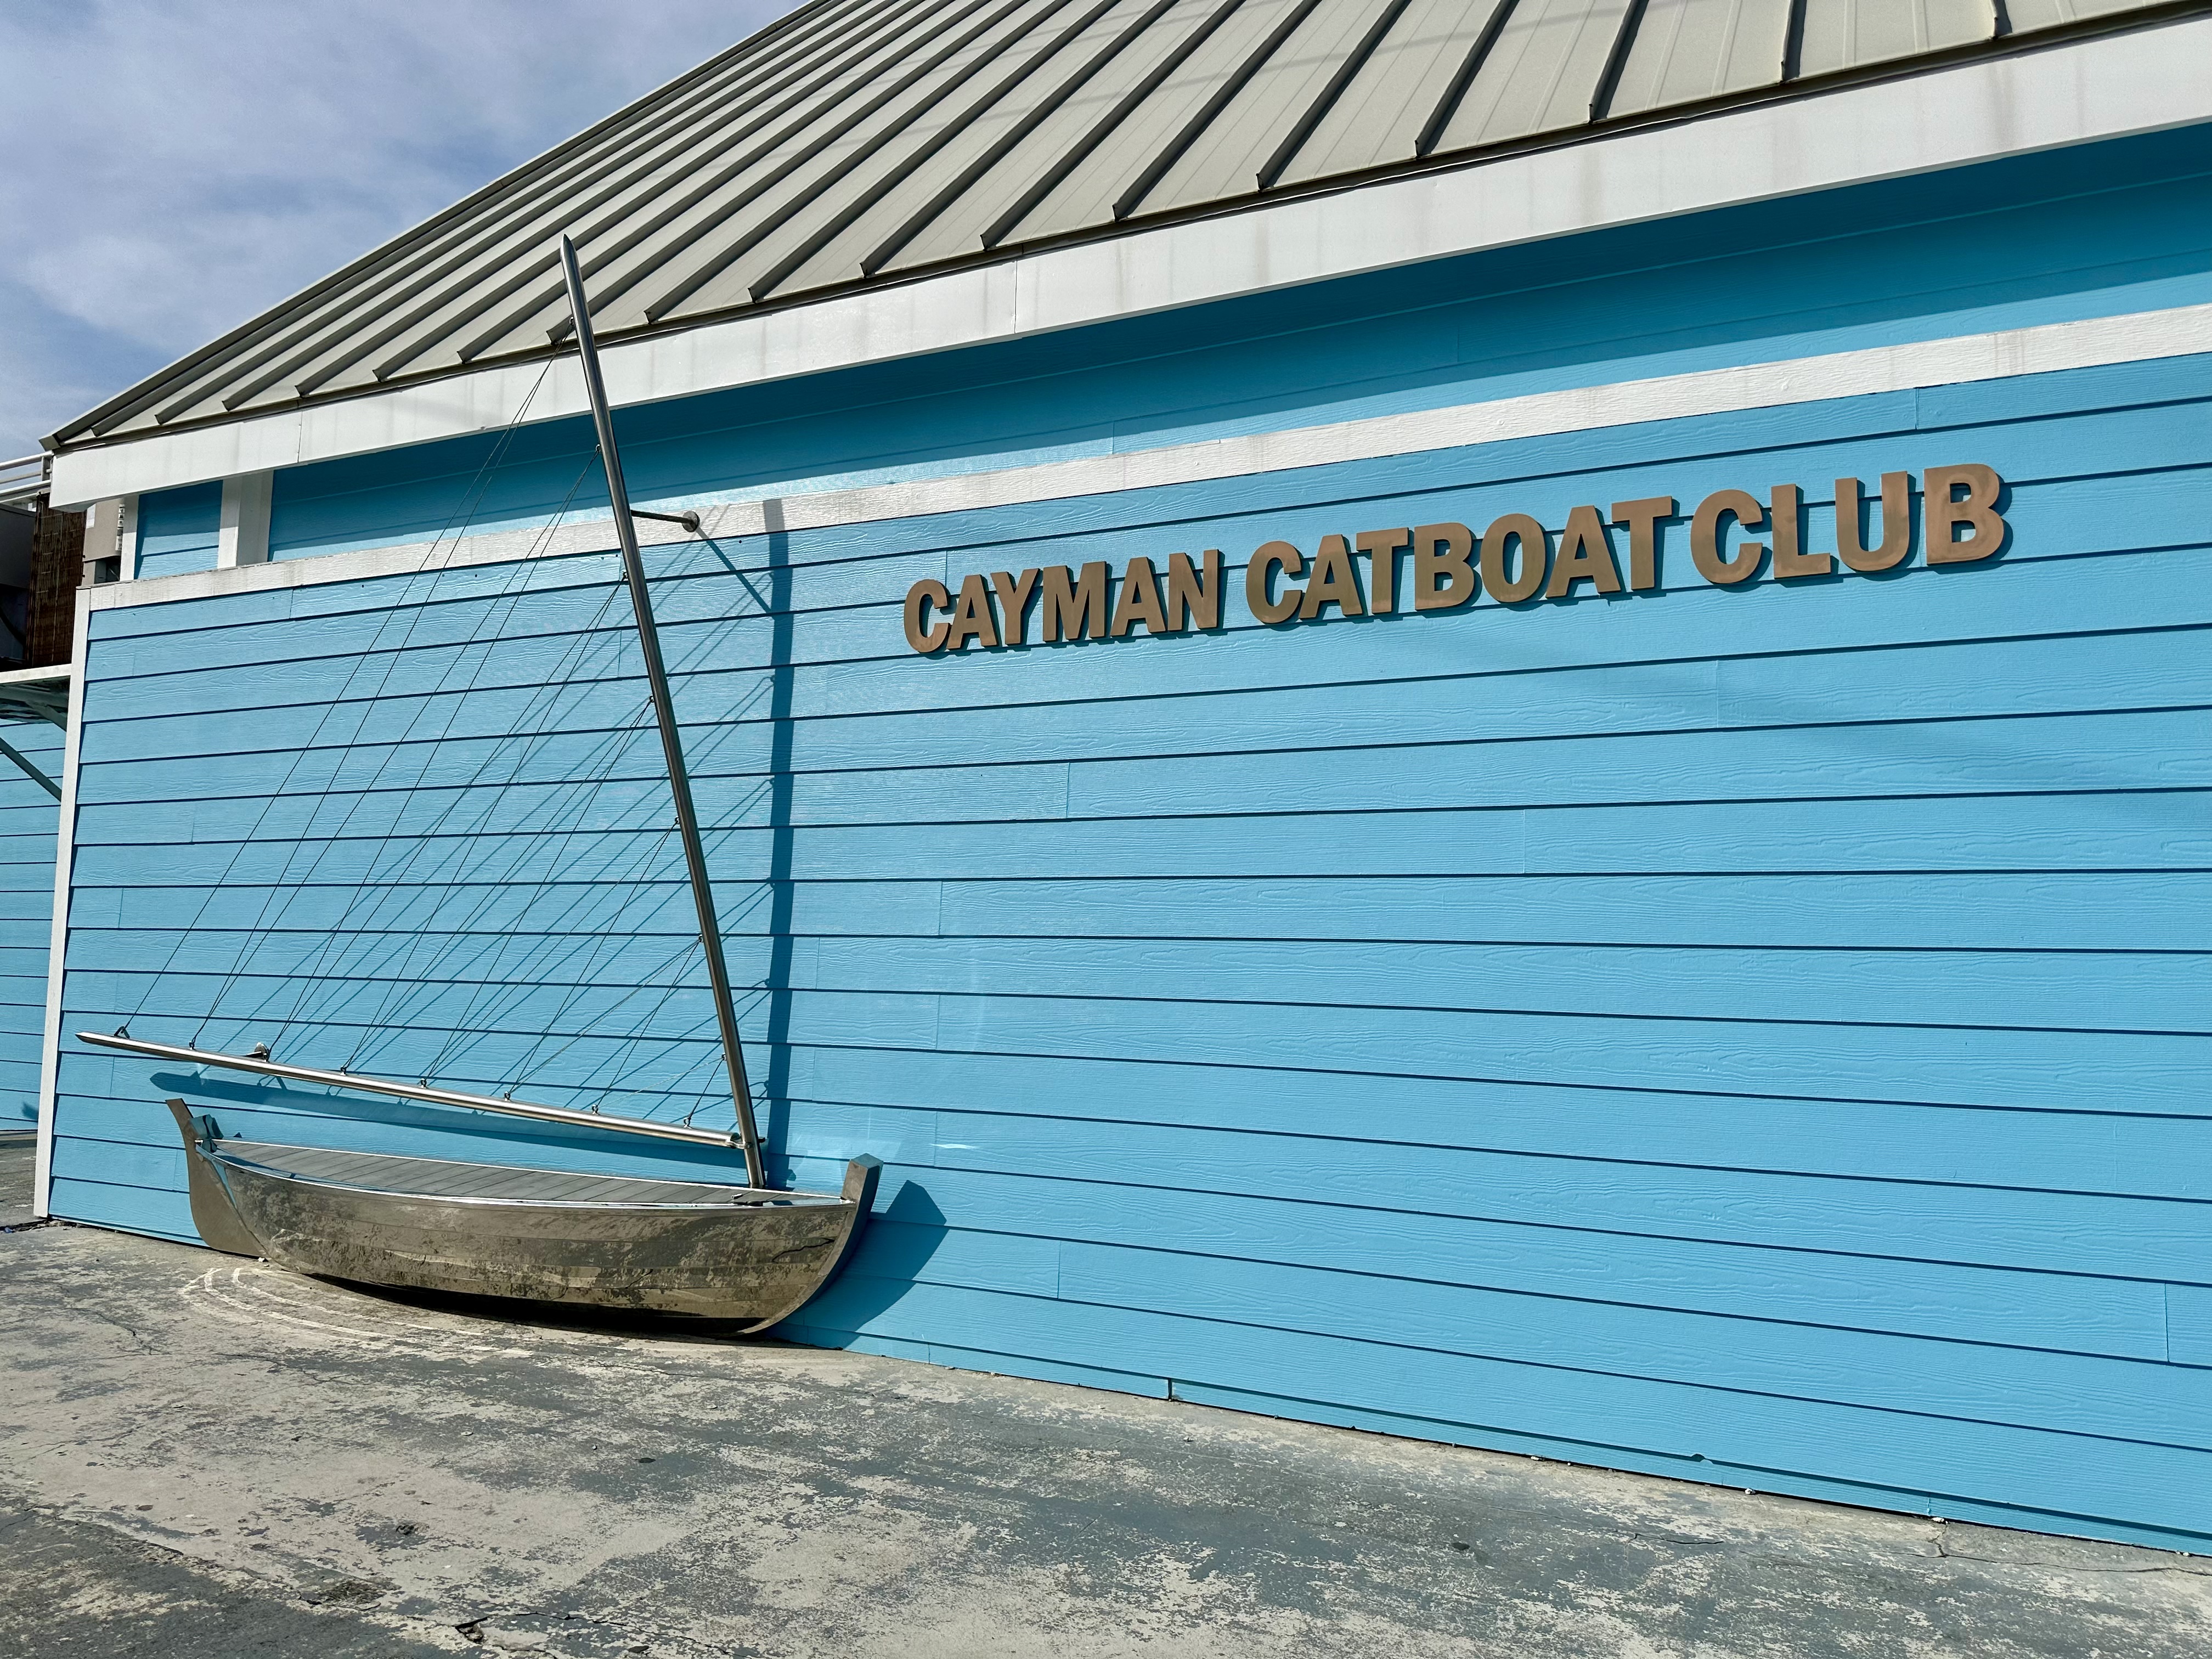 There’s a new cat in town: honouring a Caymanian legacy